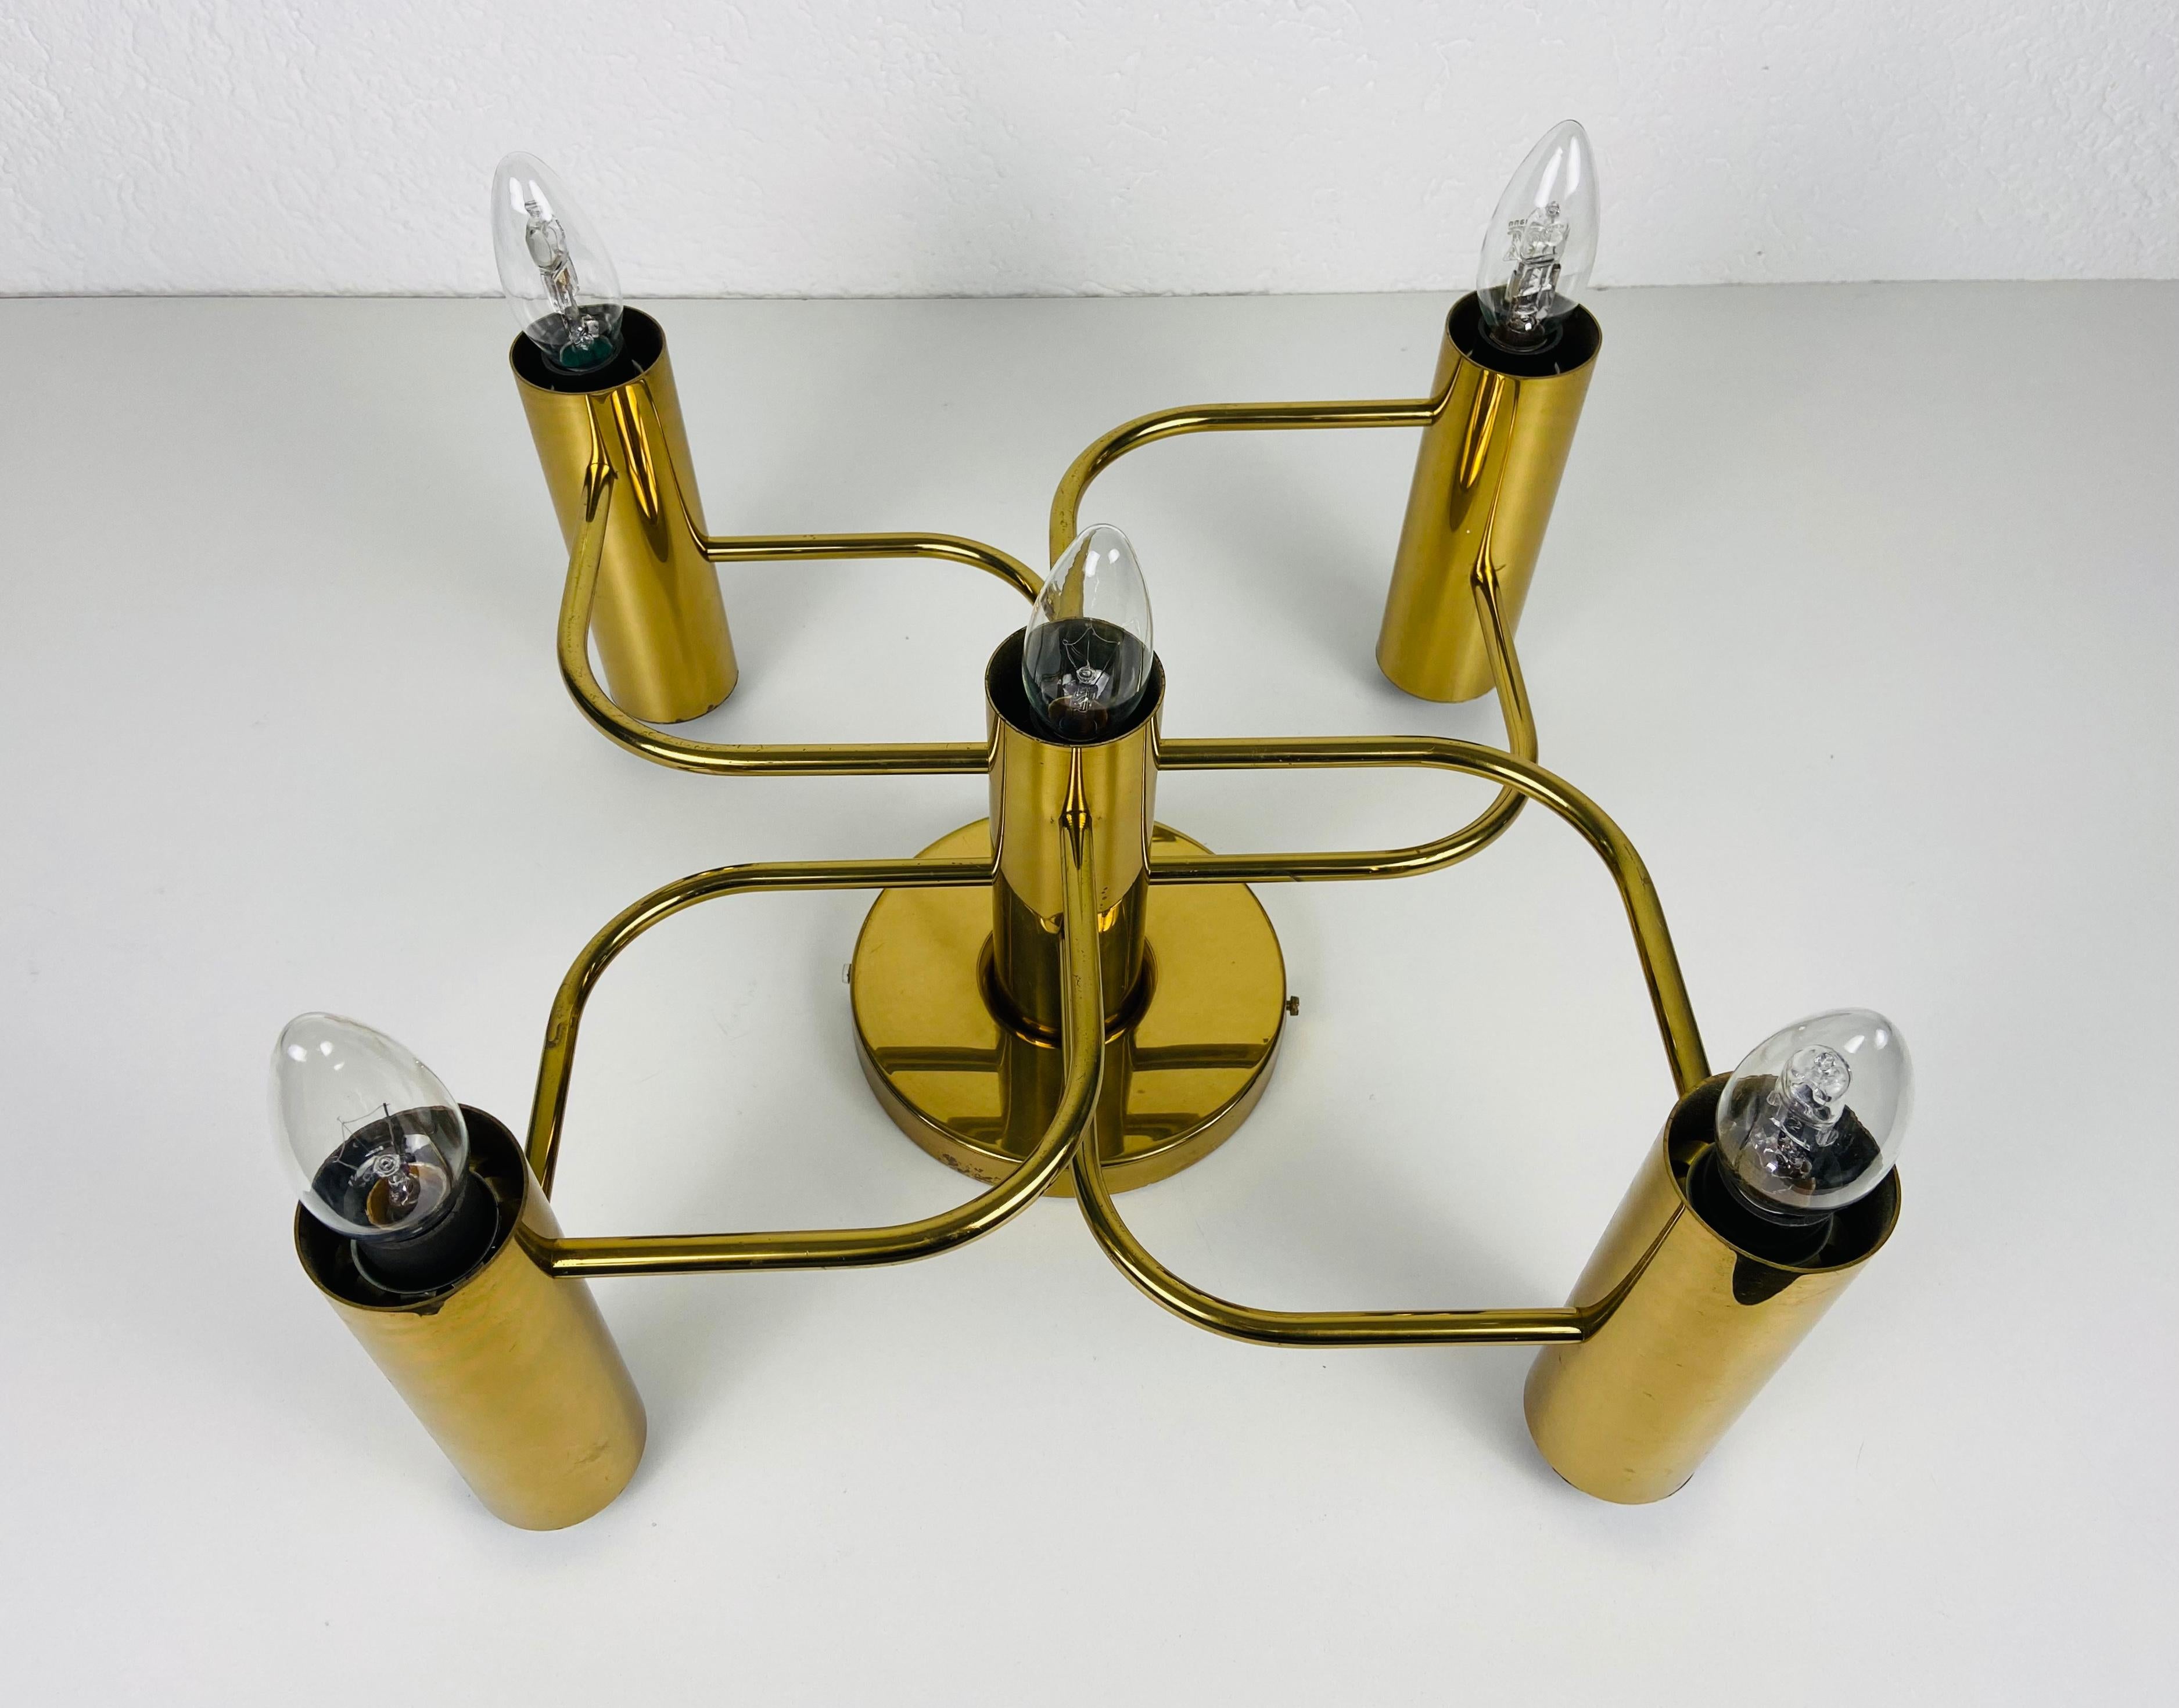 A flush mount made in Germany by Leola in the 1960s. It is fascinating with its five brass arms, each of it with an E14 light bulb.

The light requires five E14 light bulbs. Works with both 120/220V. Very good vintage condition.

Free worldwide